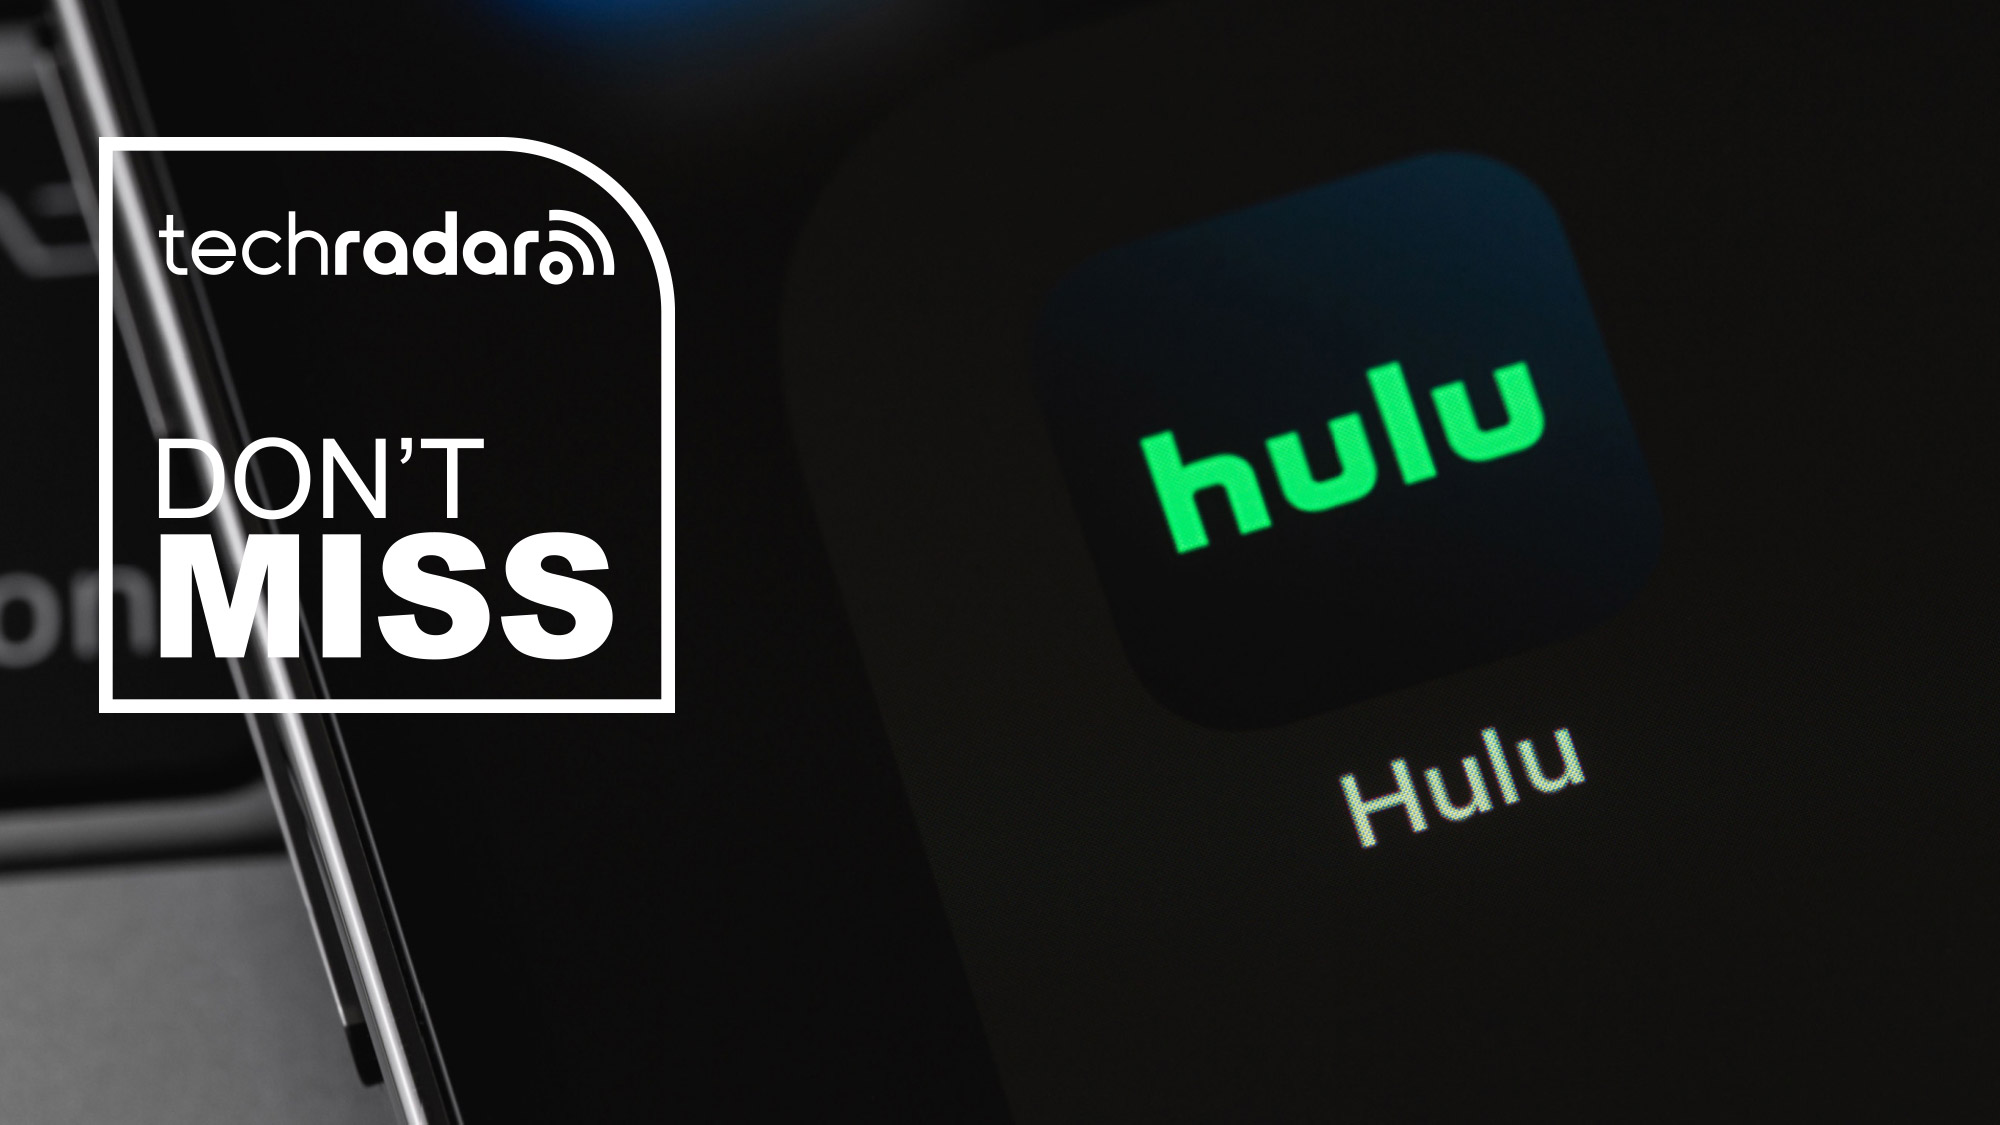 Holy cow! For the first time in years, Hulu is just $0.99 a month for ...